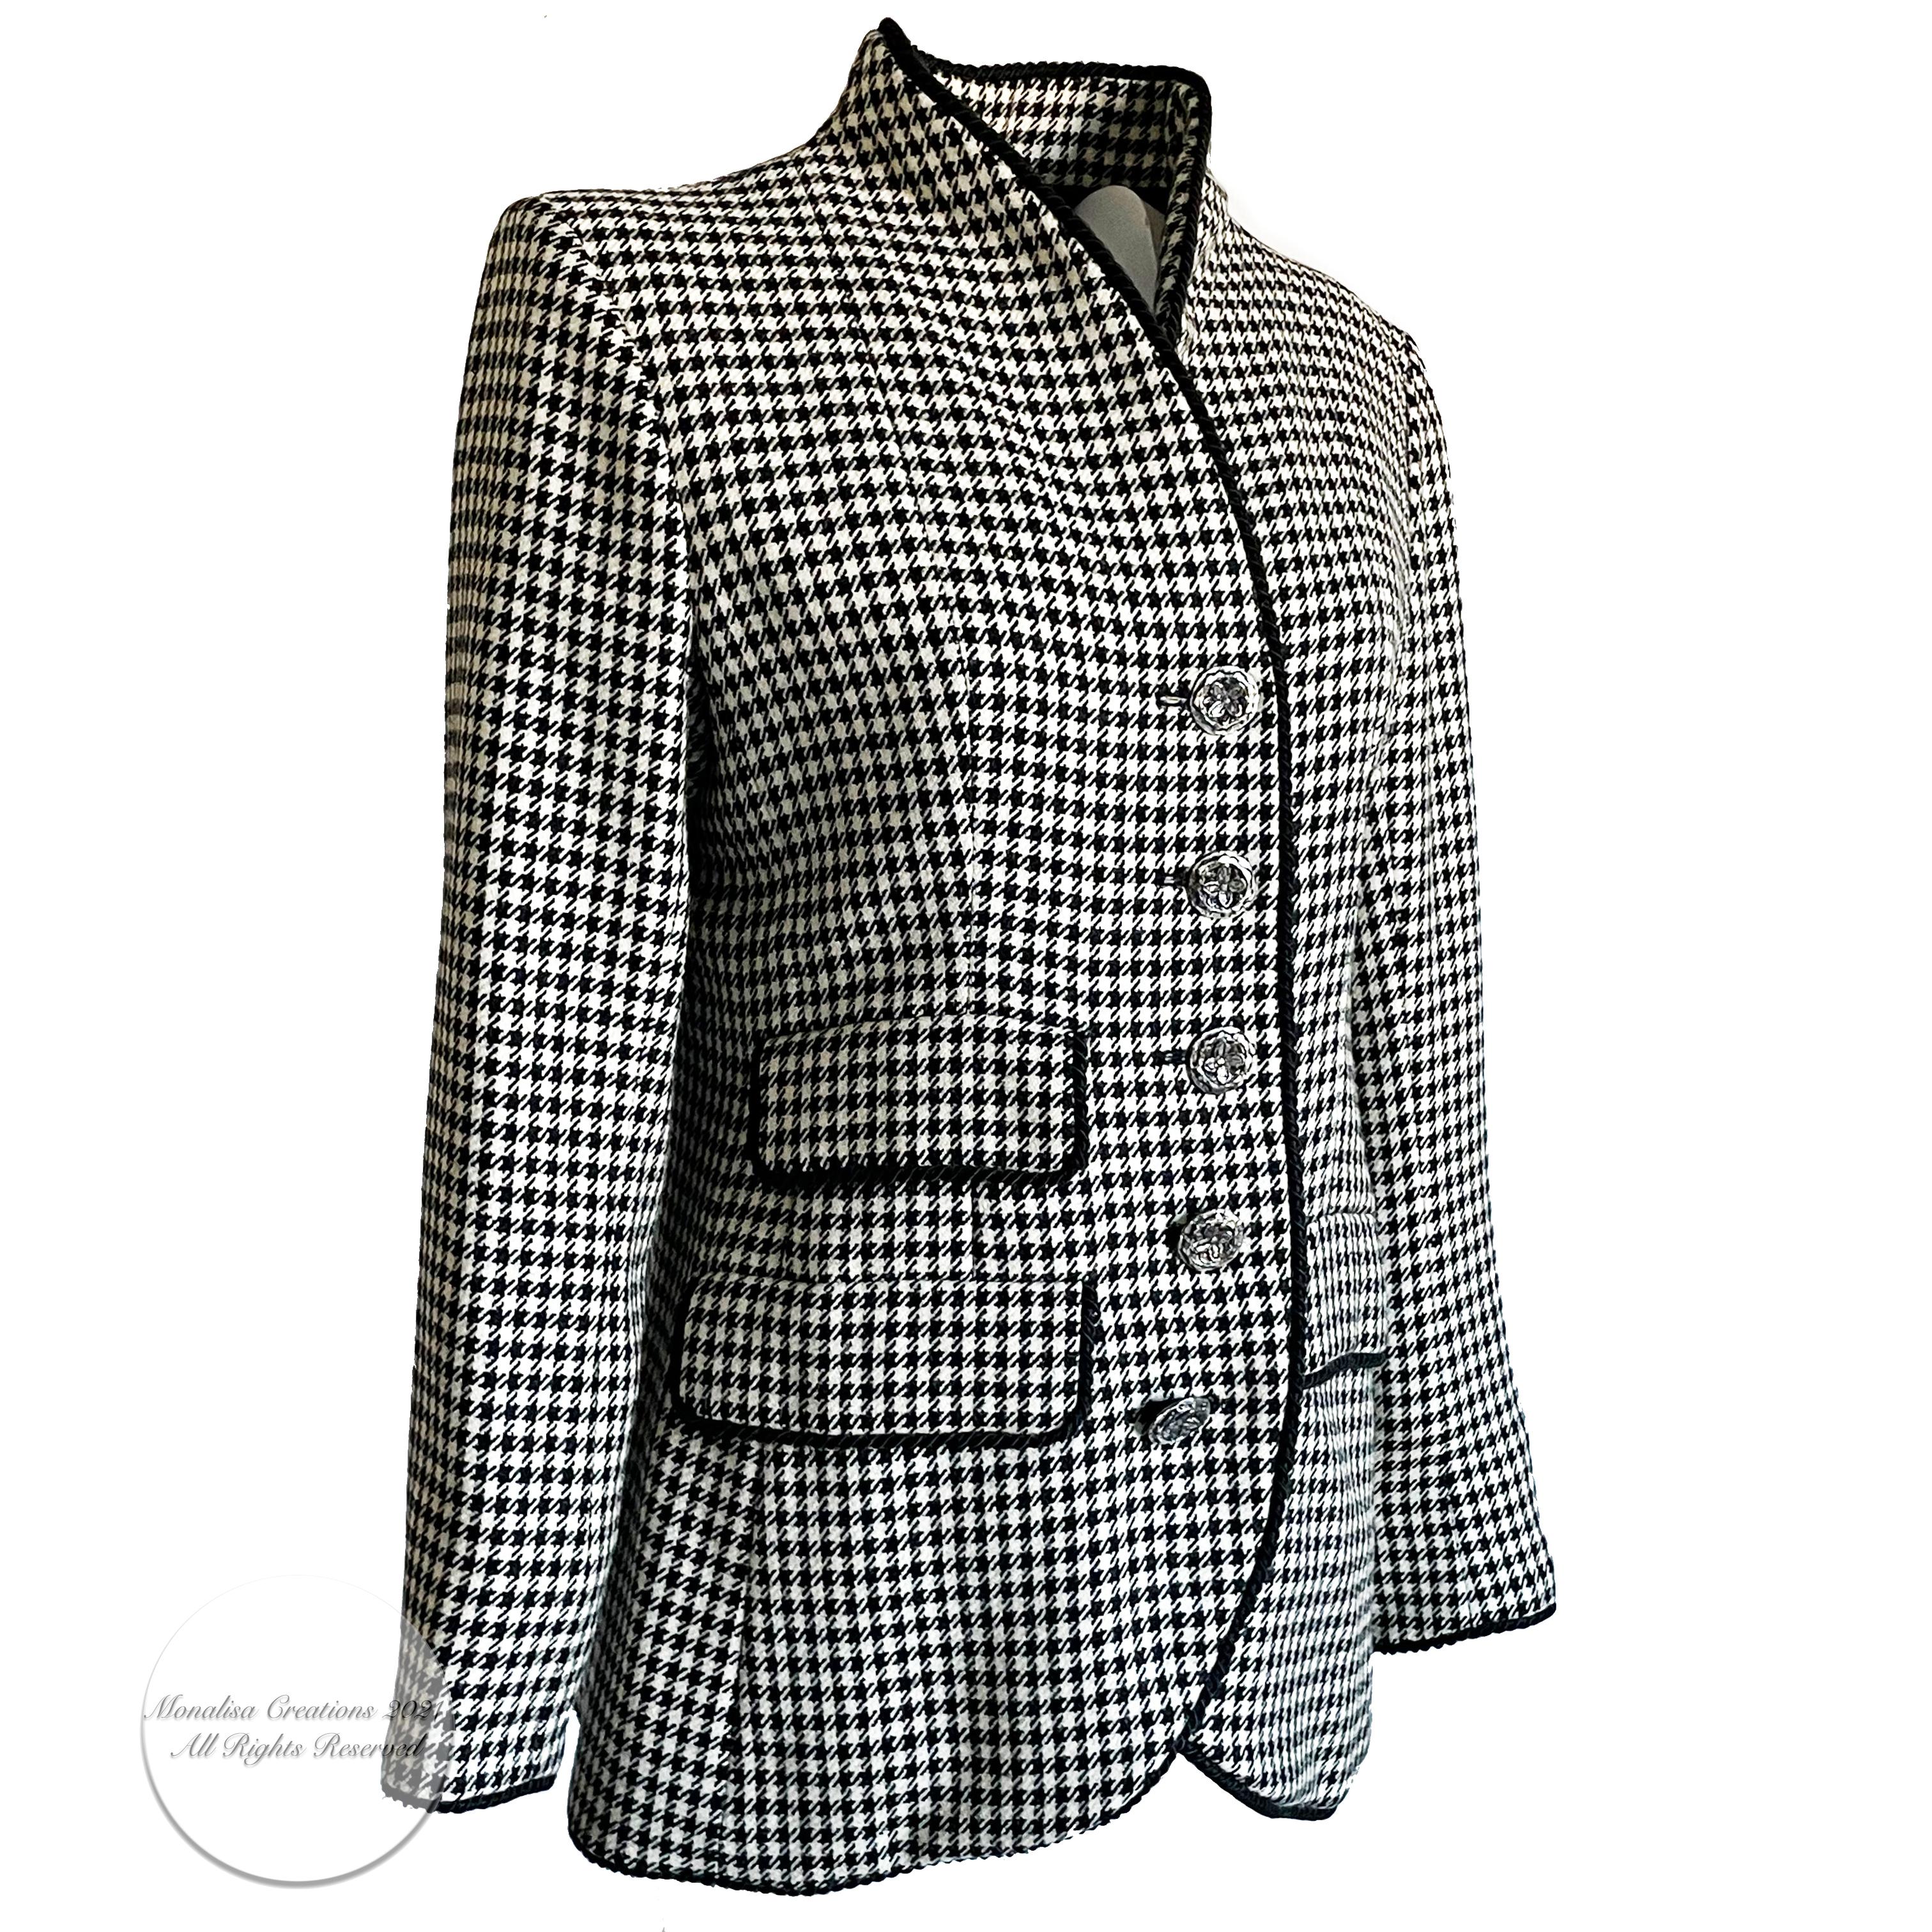 Women's Yves Saint Laurent Jacket Houndstooth Wool Black Rope Trim Floral Buttons Sz 40